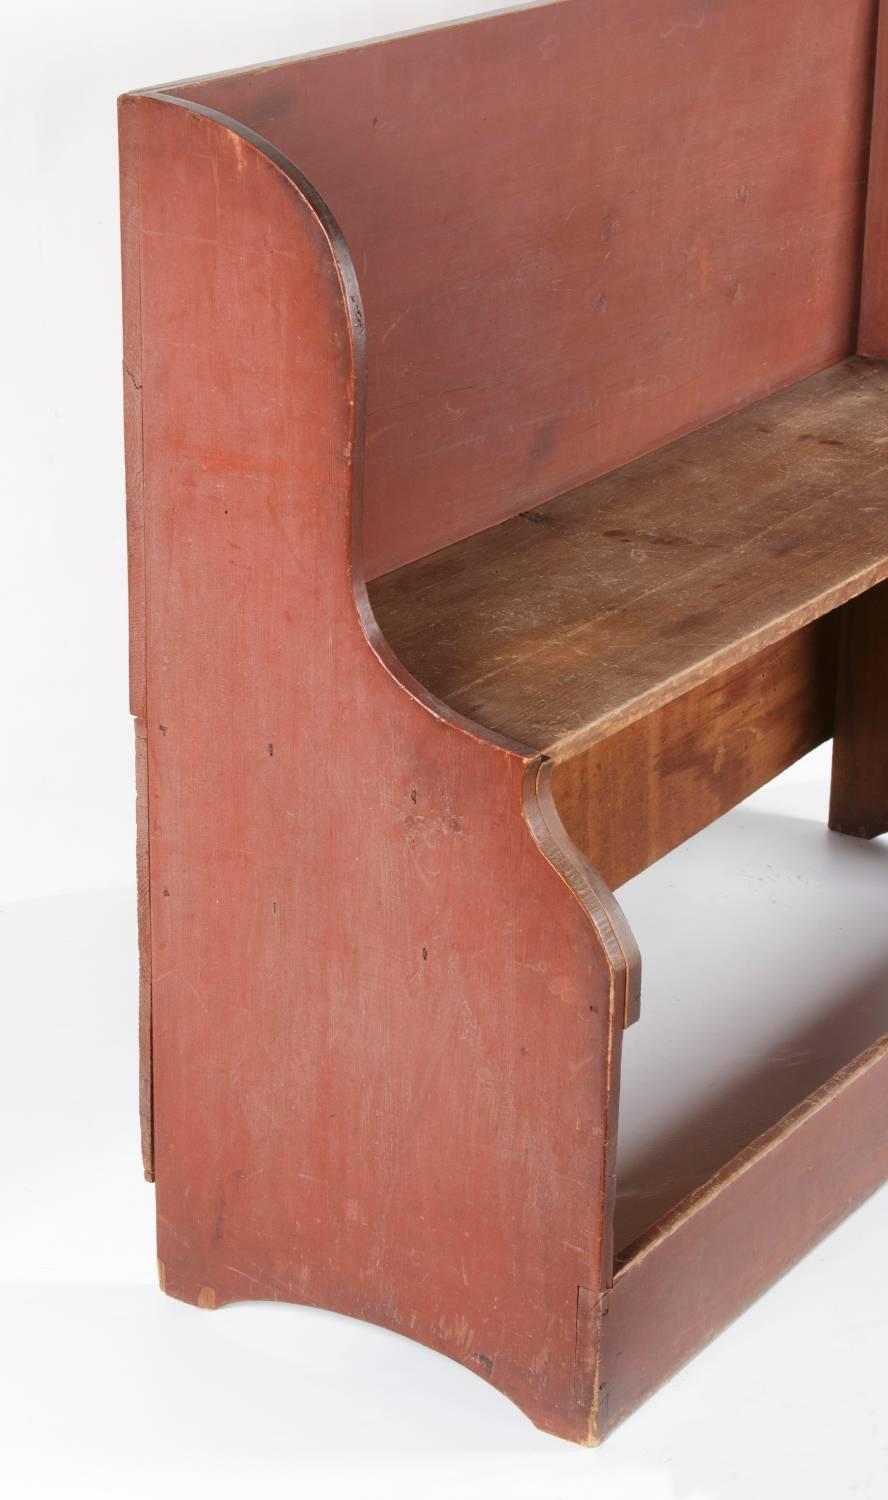 19th Century Unusual Deacons Bench/Bucket Bench in Dry Salmon Red Paint